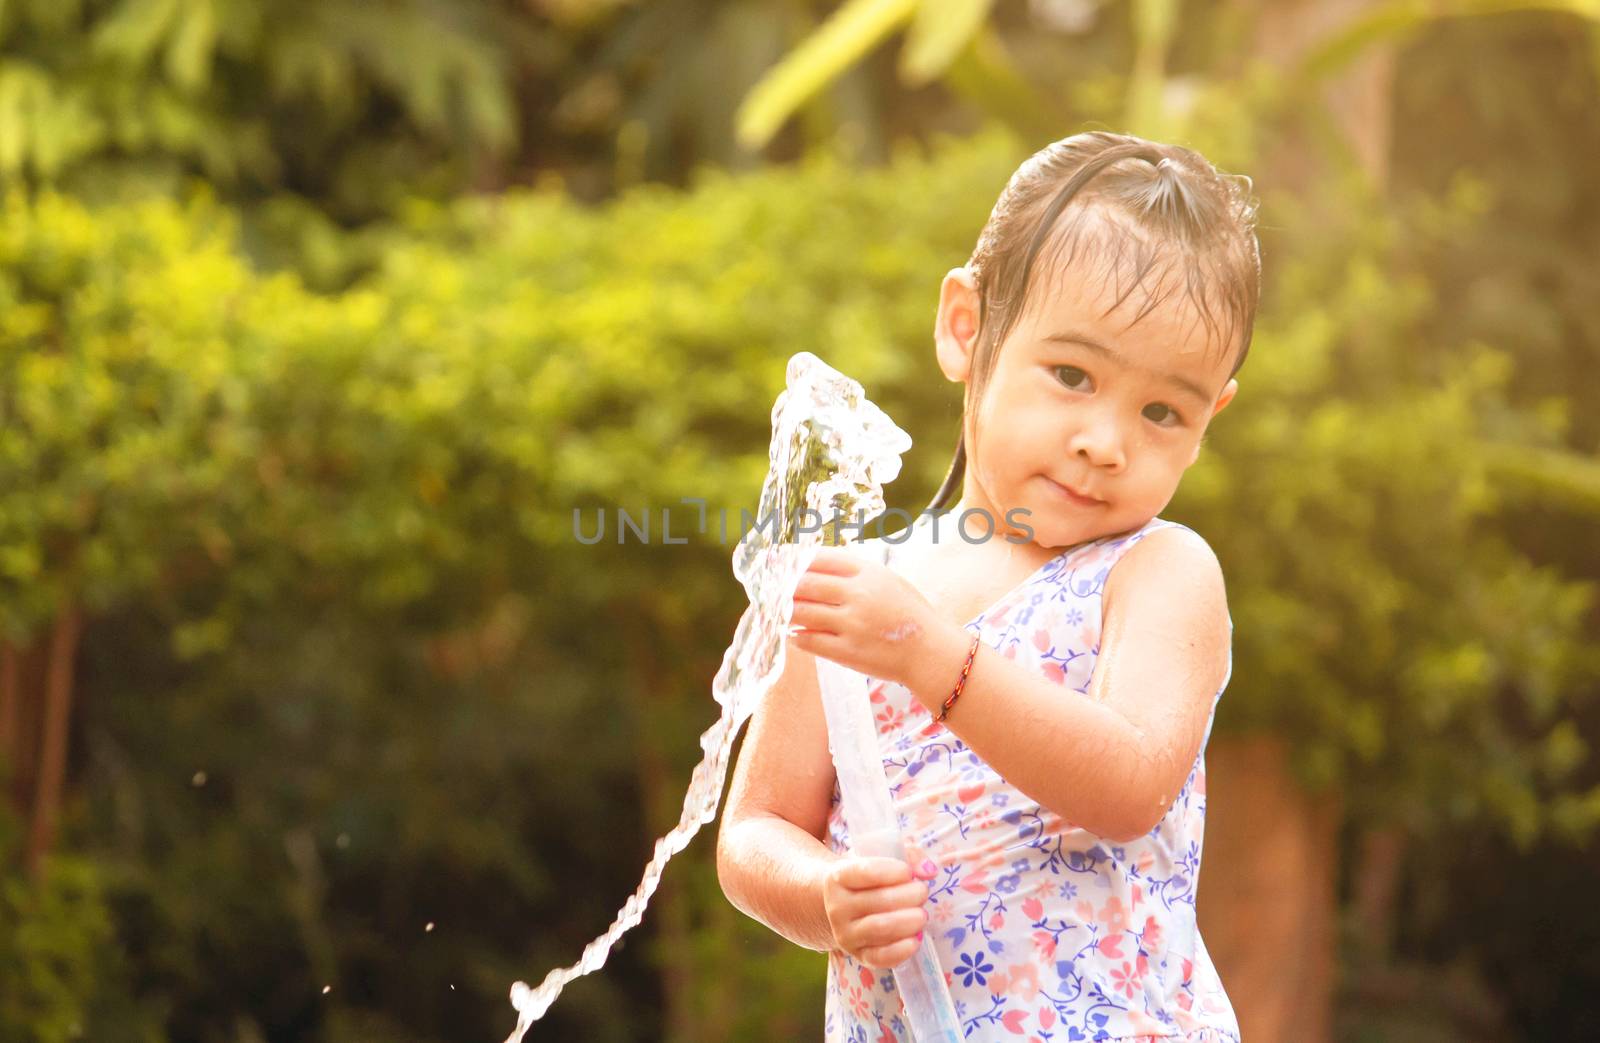 Cute little girl playing a rubber hose spraying water with sunli by TEERASAK